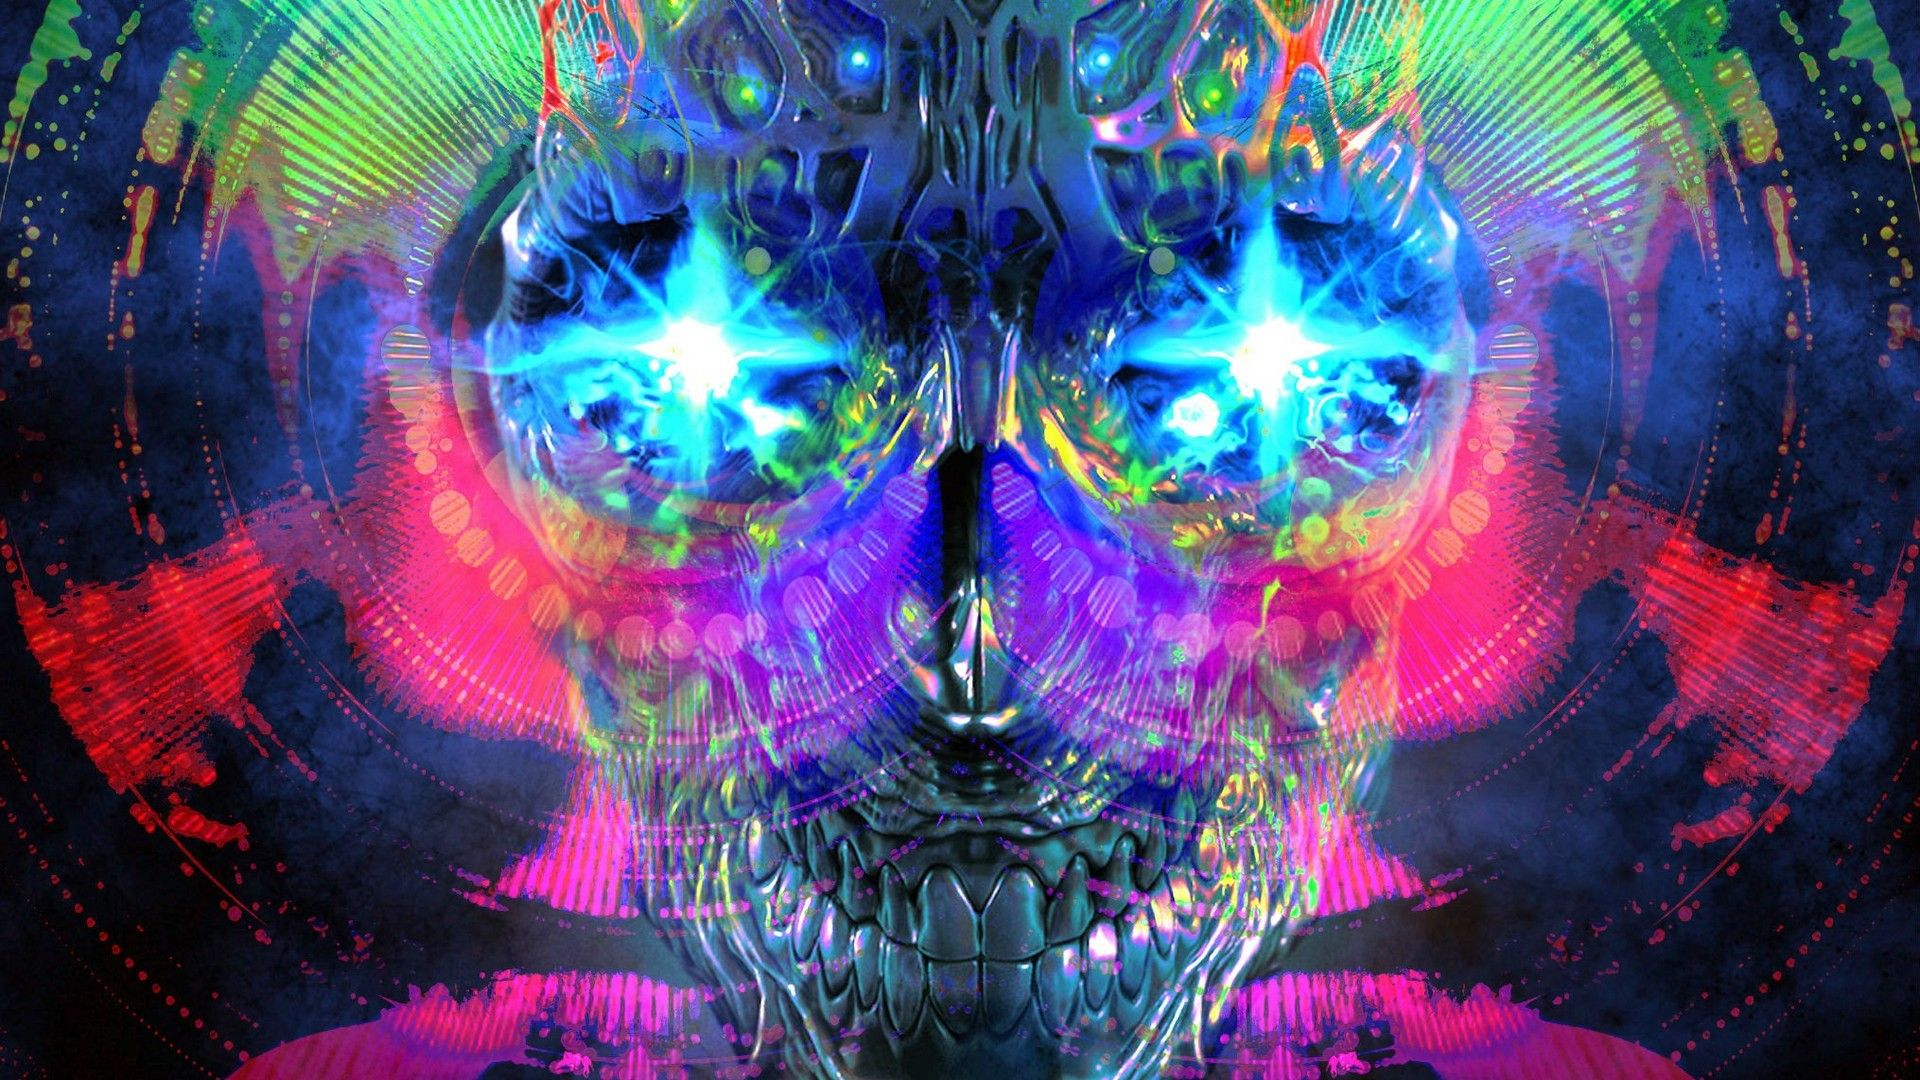 1920x1080 Wallpapers Psychedelic Art Live Wallpaper HD | Psychedelic art, Skull wallpaper, Psychedelic